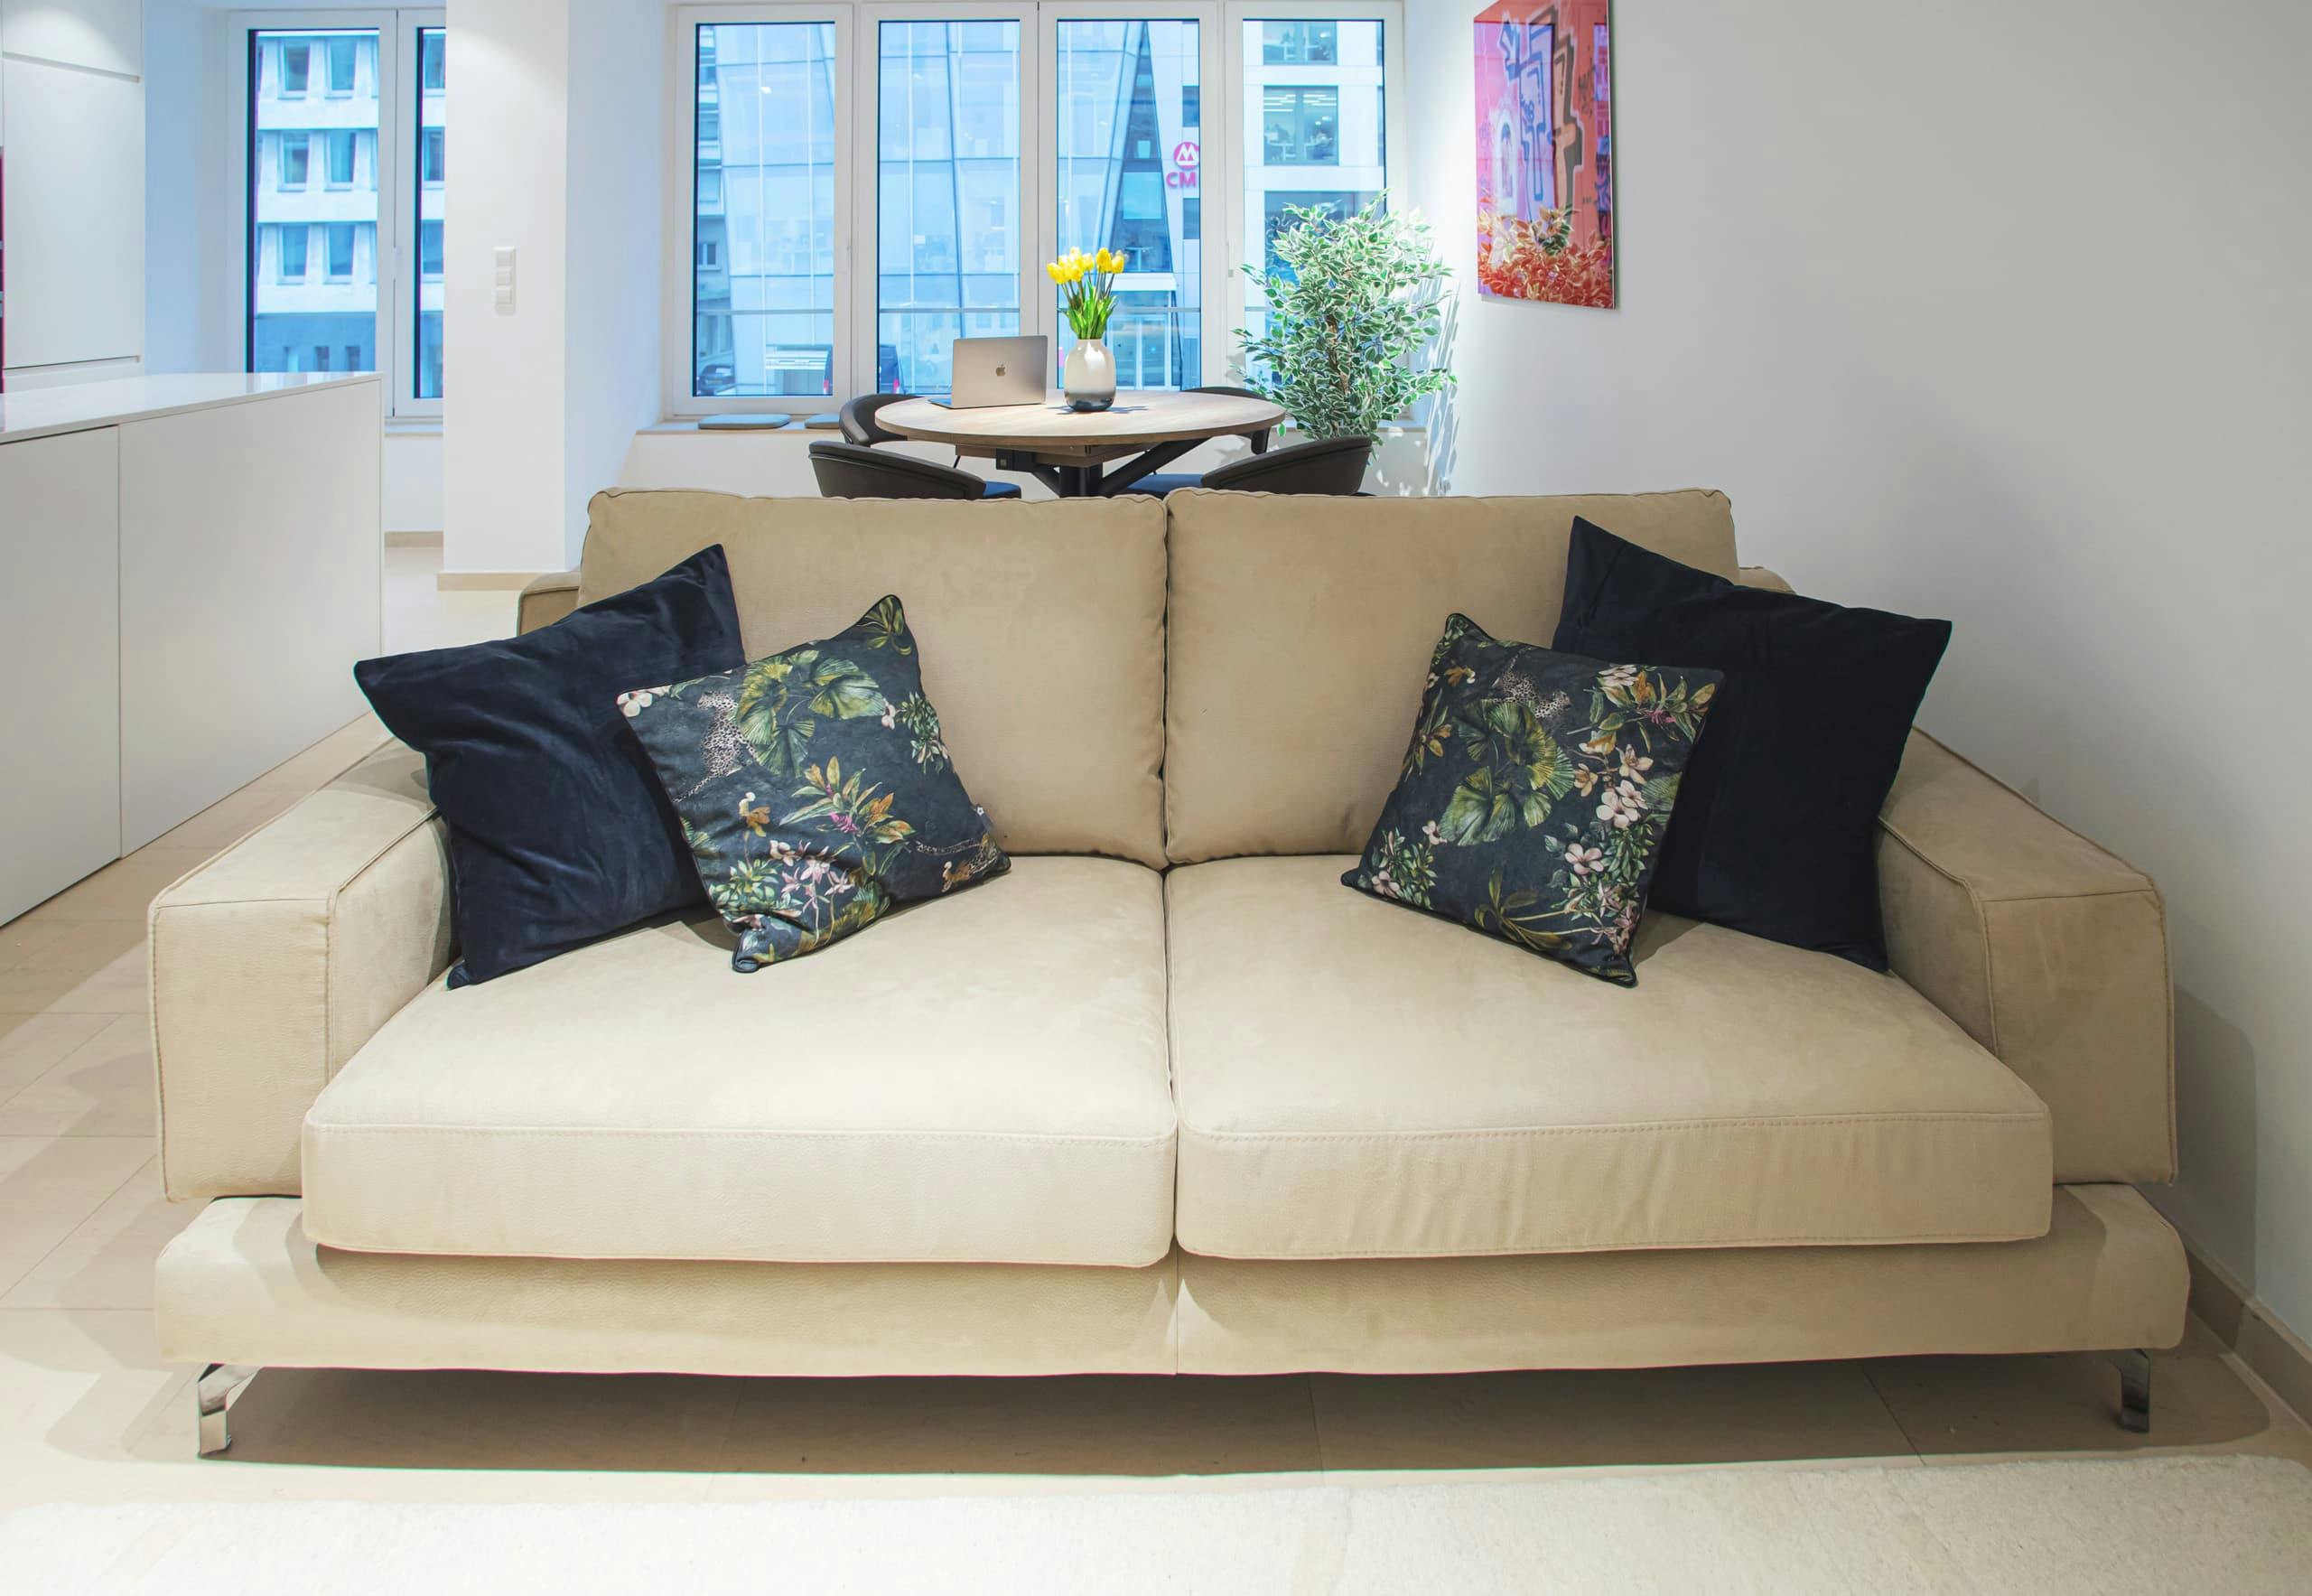 in the foreground is a beige sofa with cushions on it. Behind it, in the background, is a dining table with chairs and big windows. On the left the corner of the countertop is visible, and on the right, a big picture hangs on the wall.